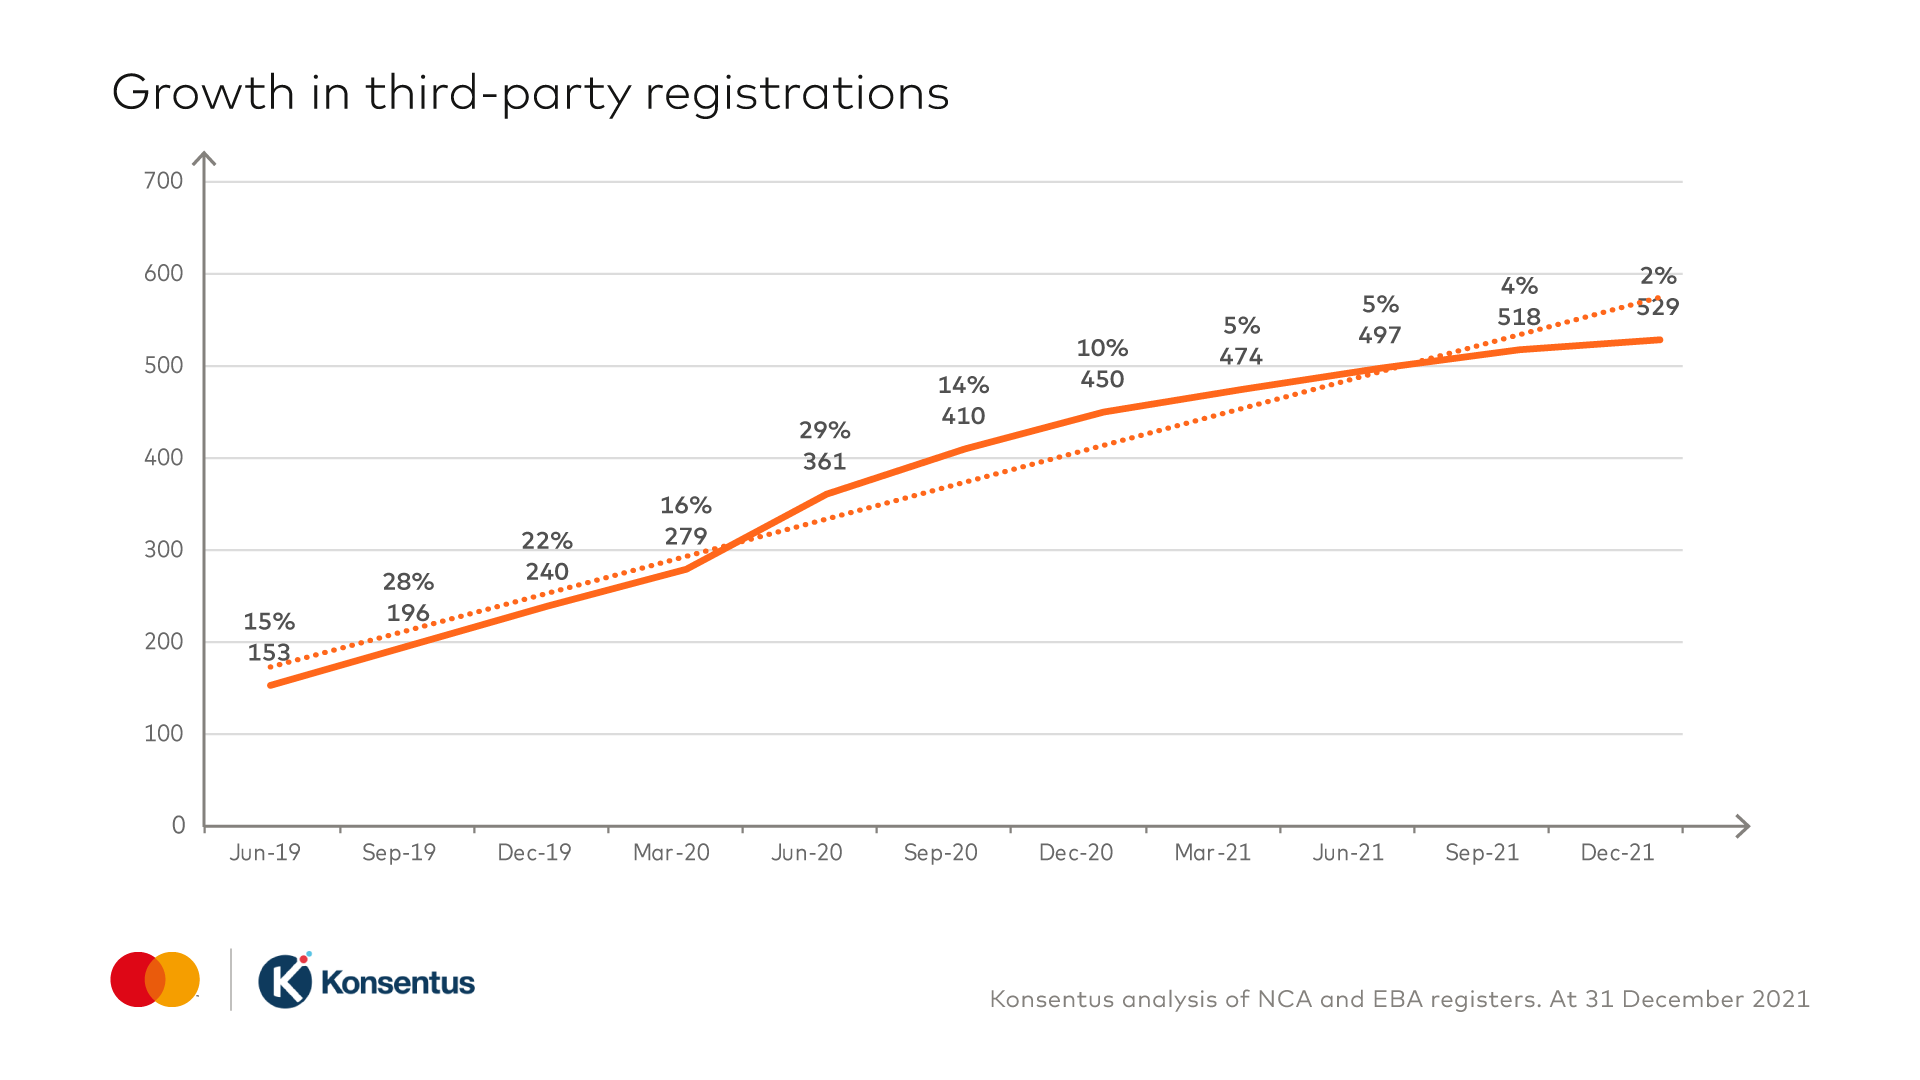 Two percent growth in third party registrations.